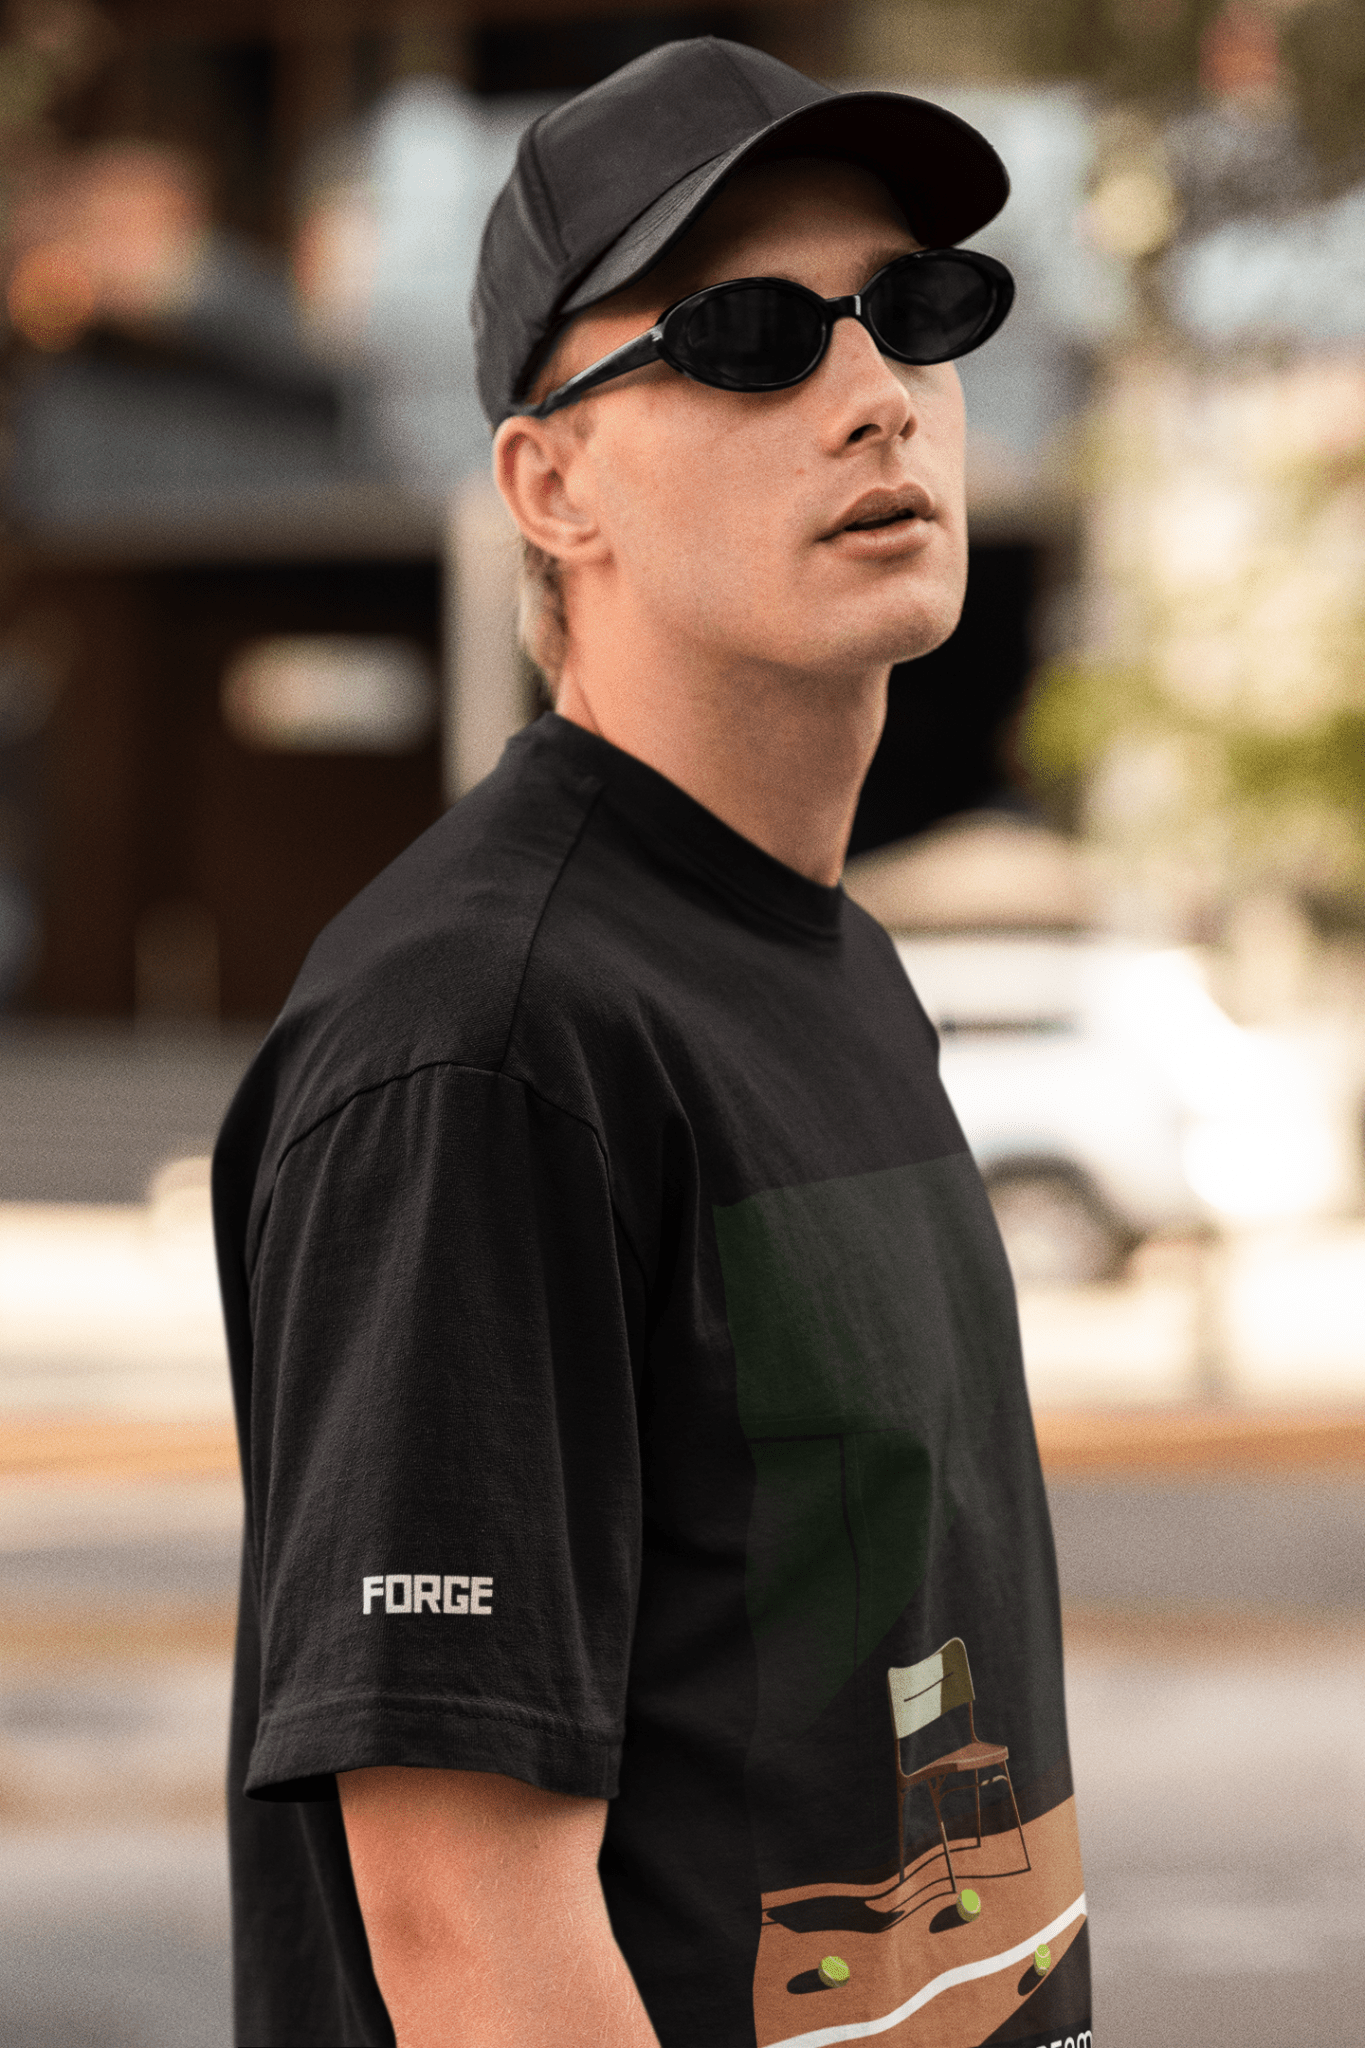 Side view of black casual t-shirt worn by a white man along with black sunglasses.